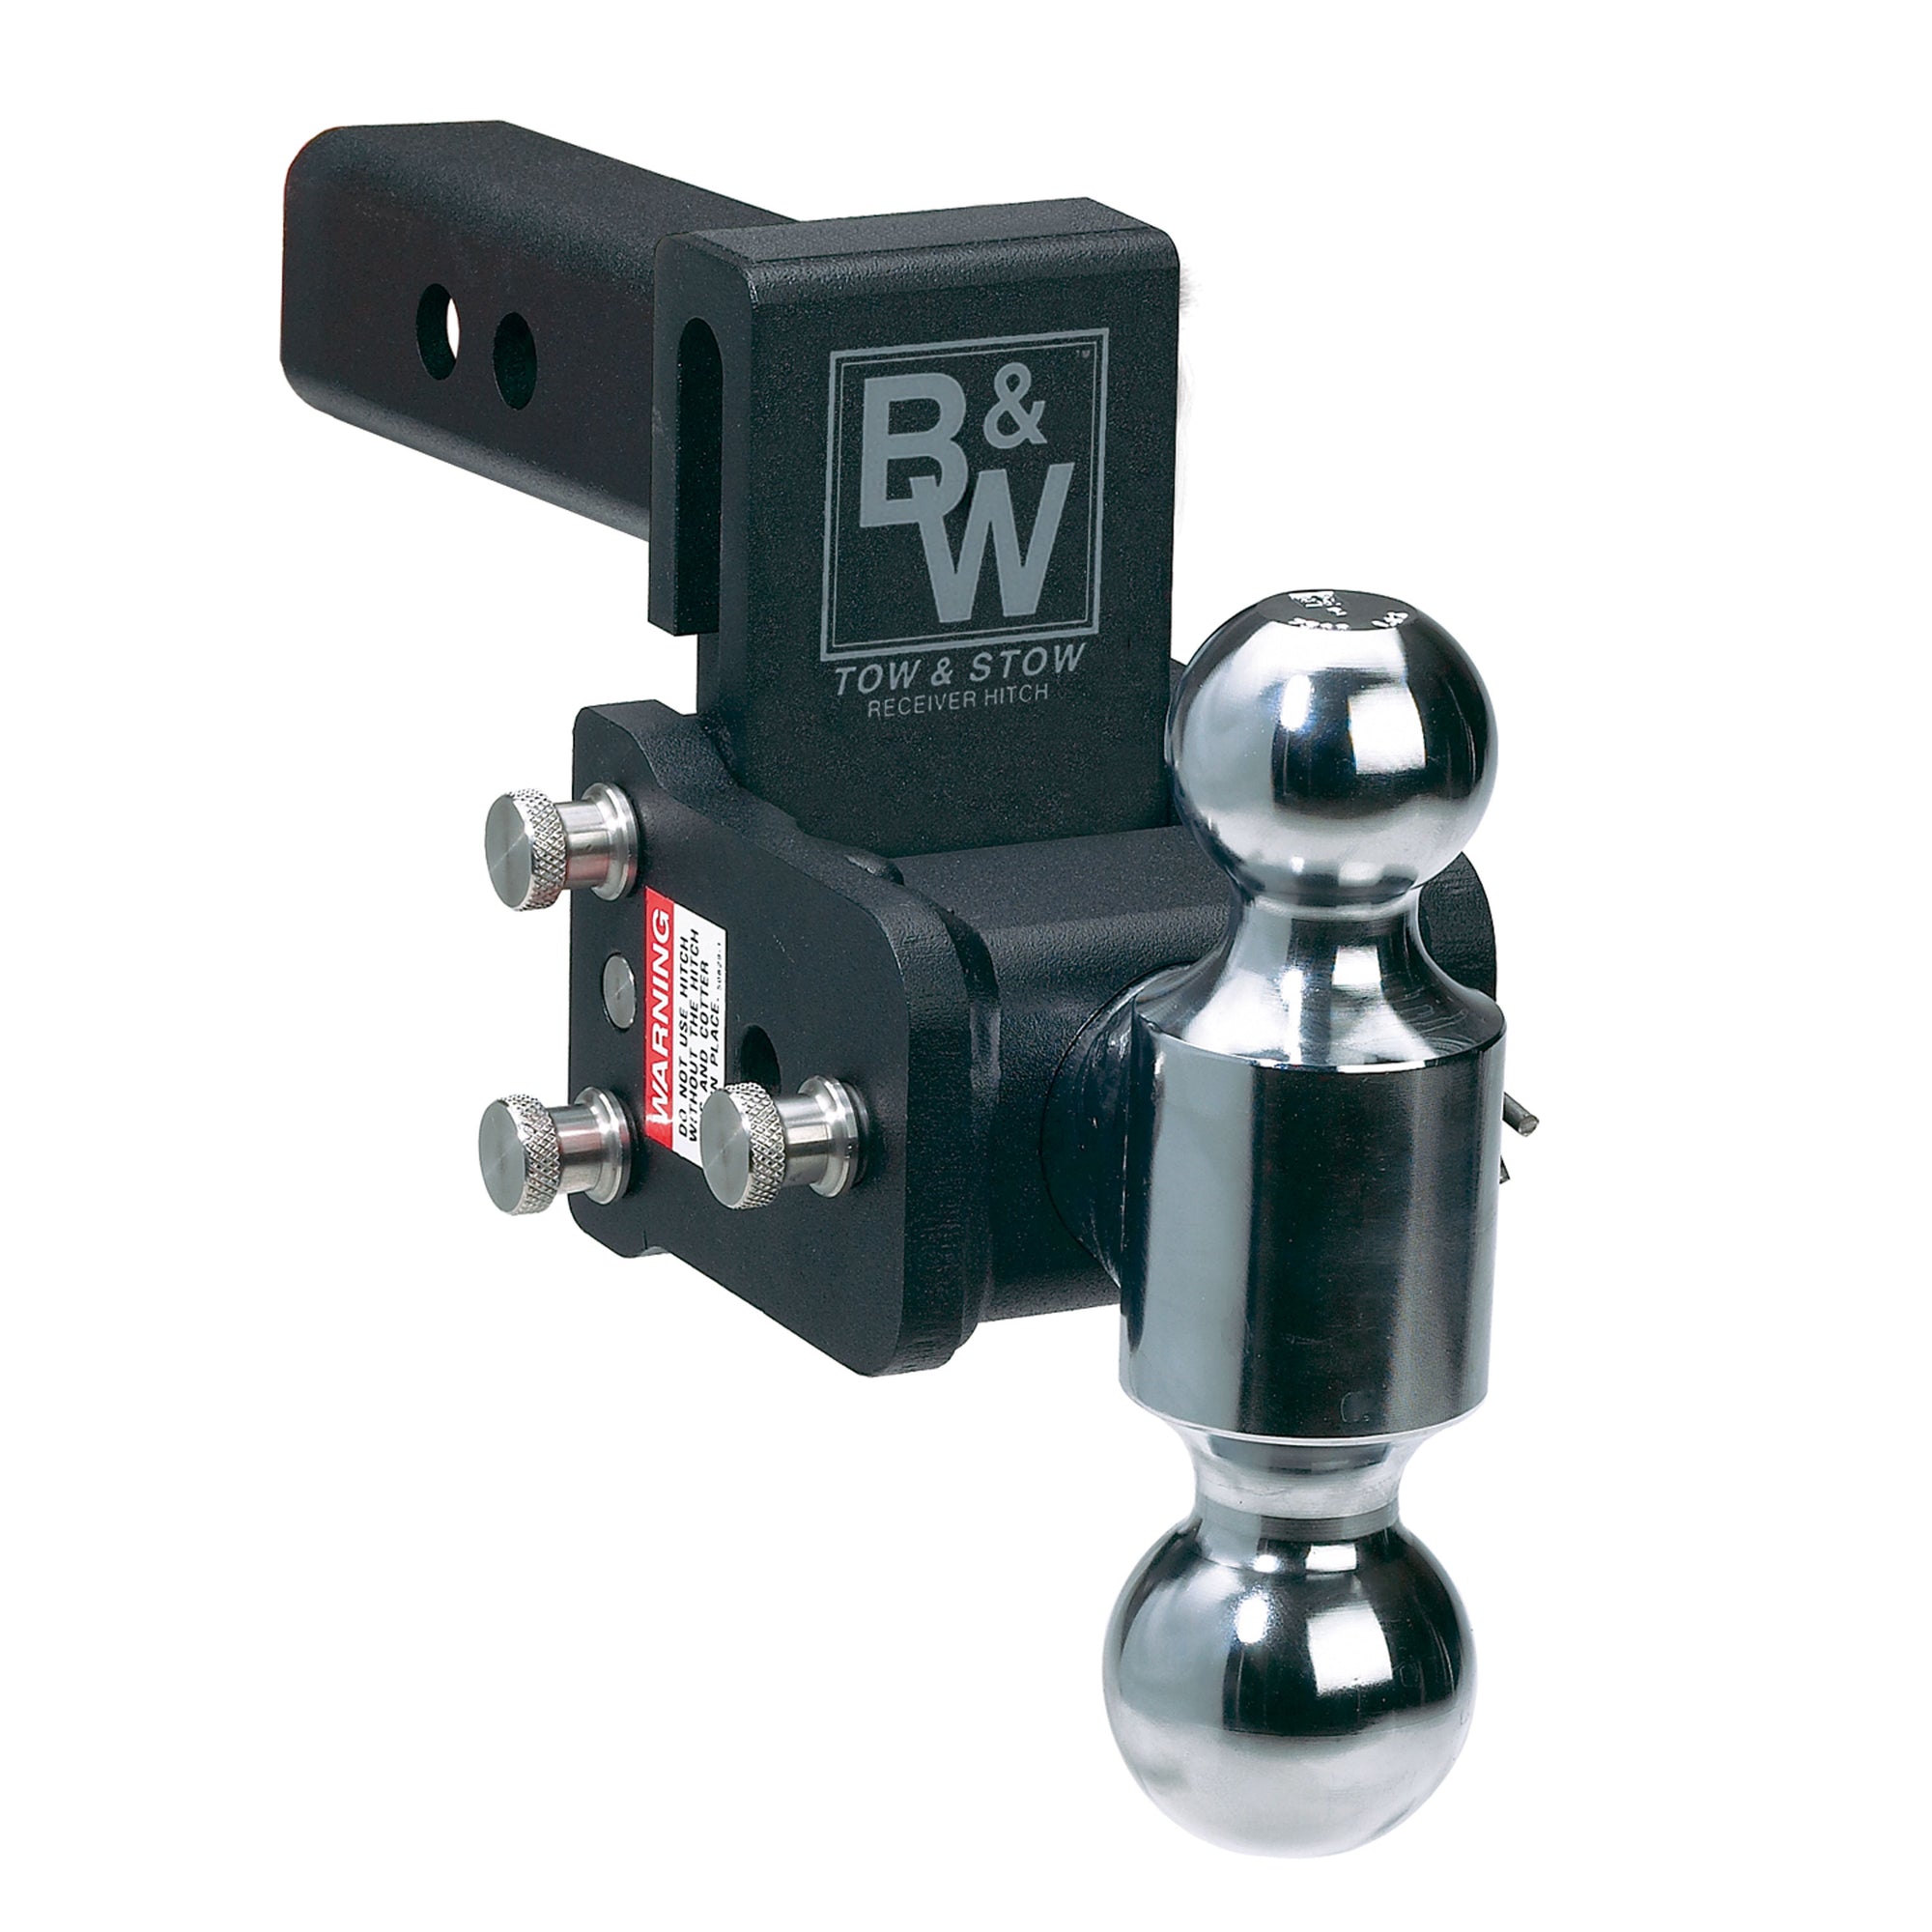 B&W Trailer Hitches TS20037B Tow and Stow Adjustable Ball Mount - 2-5/16" & 2" Ball, 5" Drop, 5.5" Rise, Black